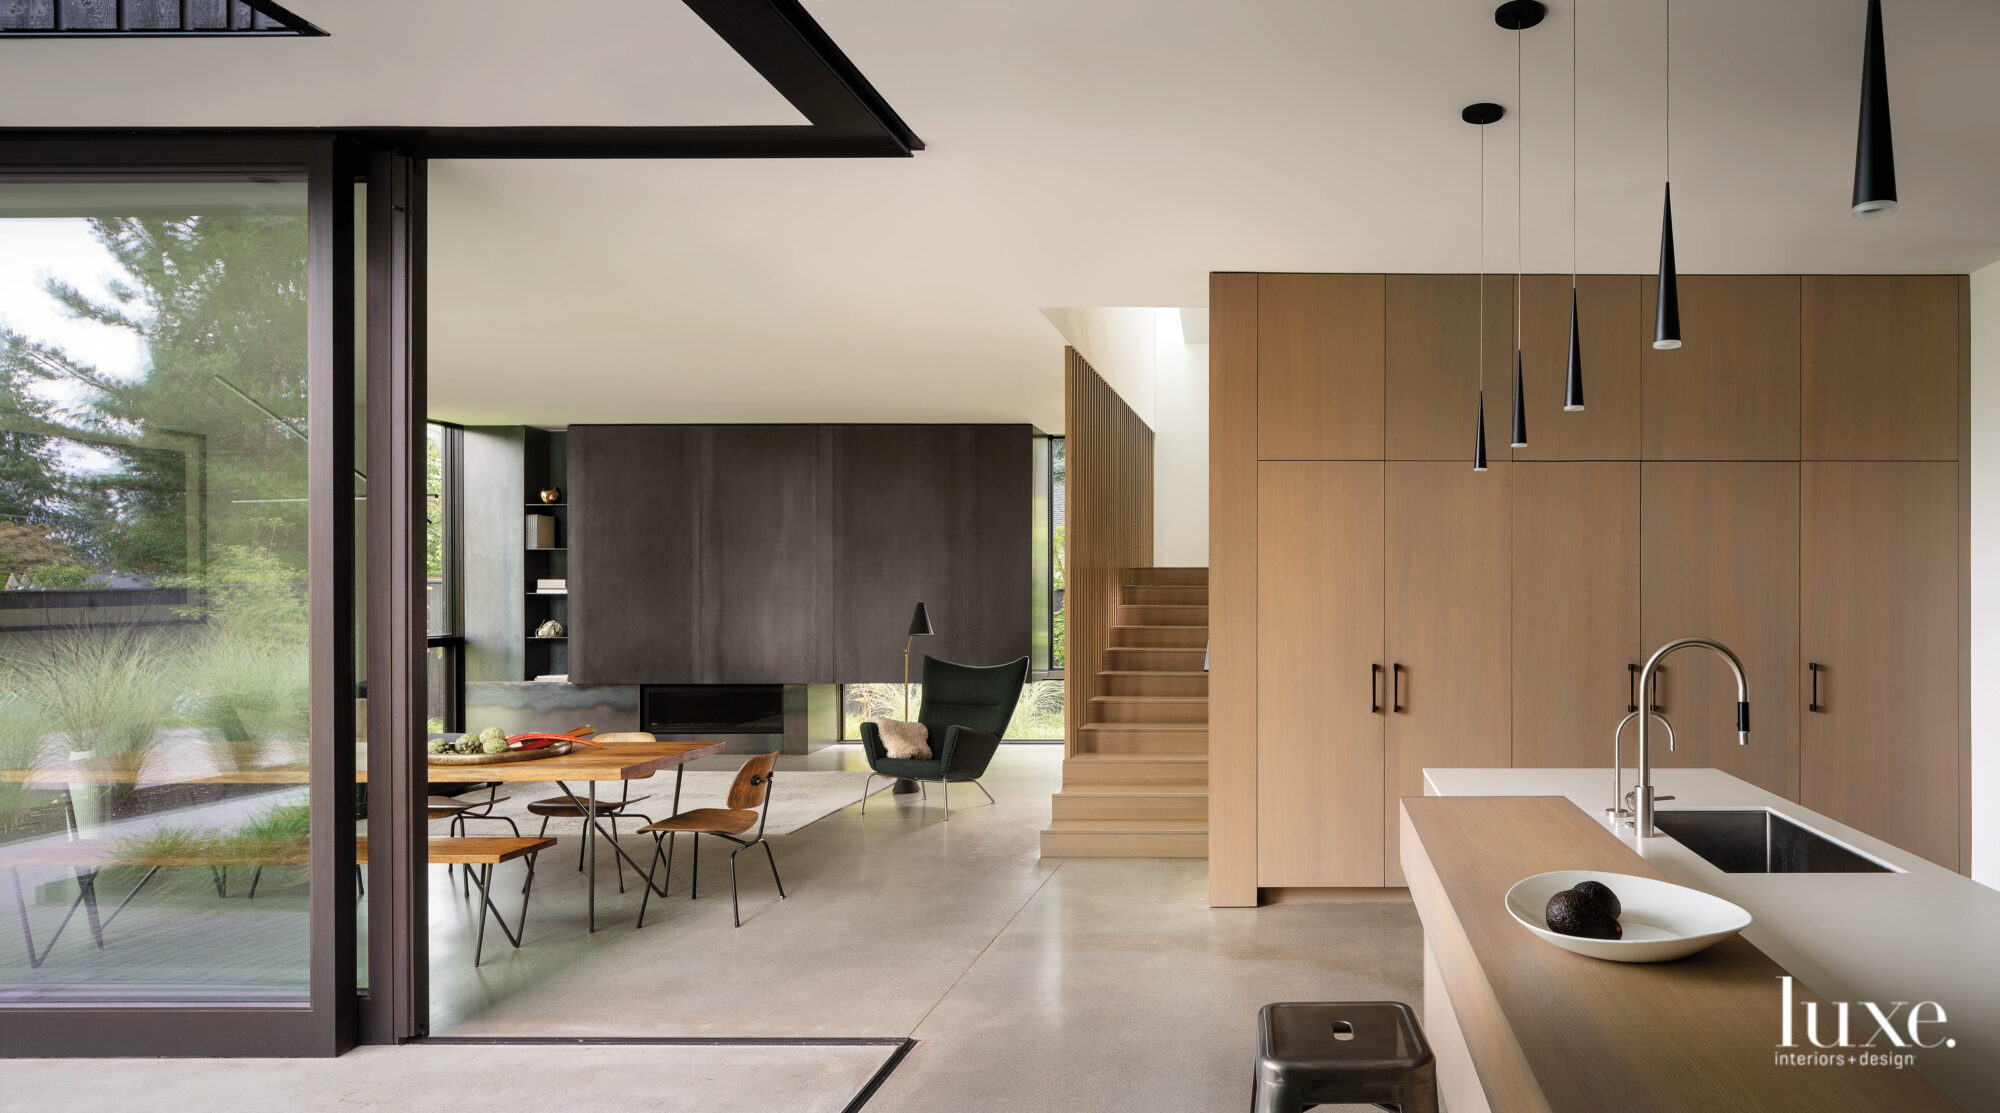 View of dining, living and kitchen spaces